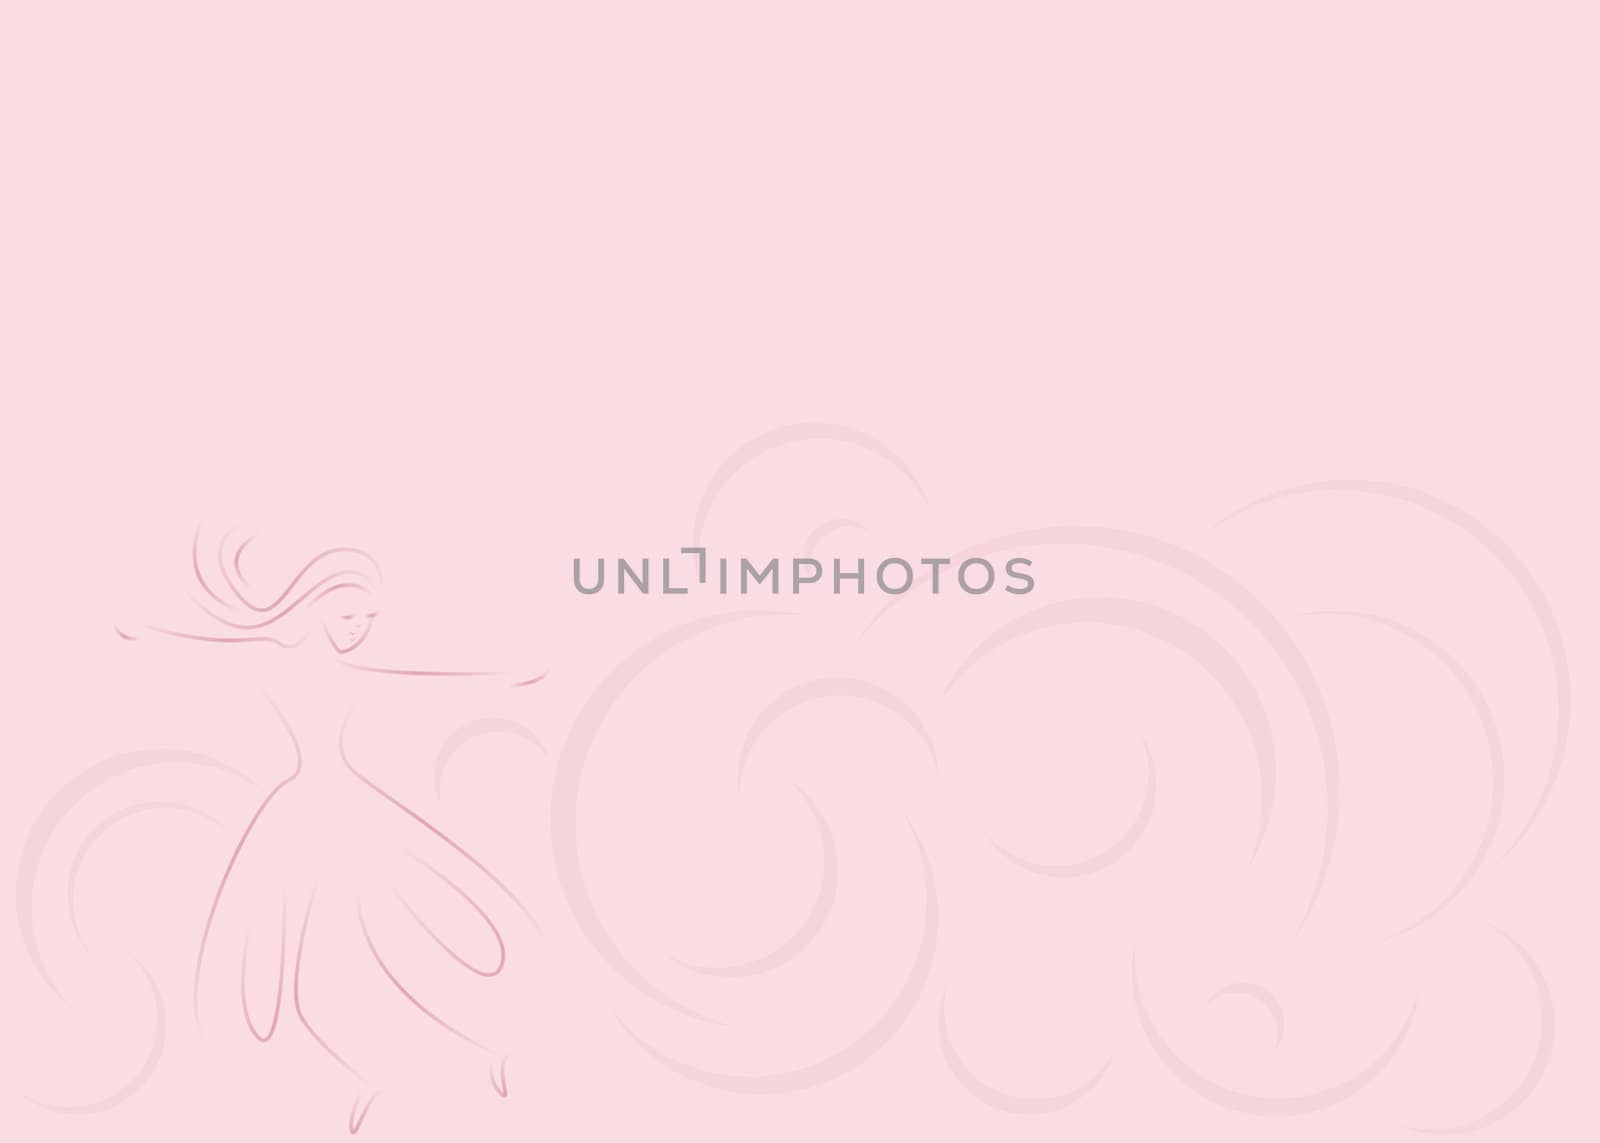 Drawing of woman twirling on abstract pink background 